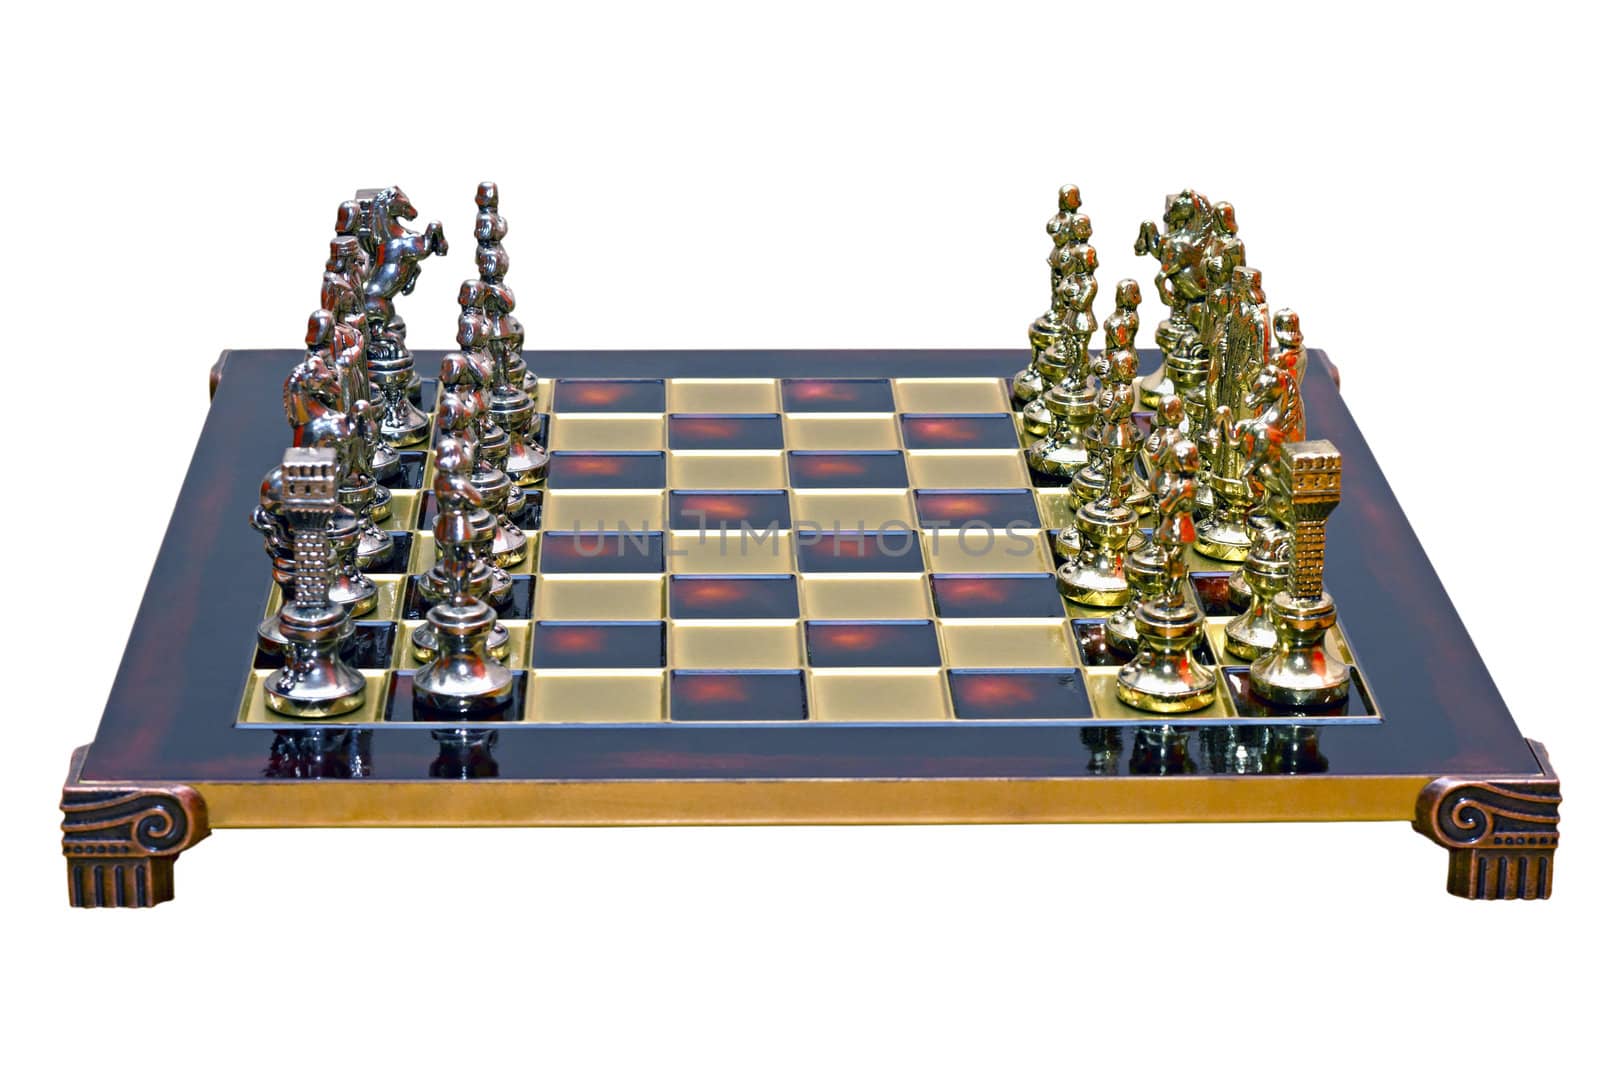 cast iron lacquered chess board by Plus69